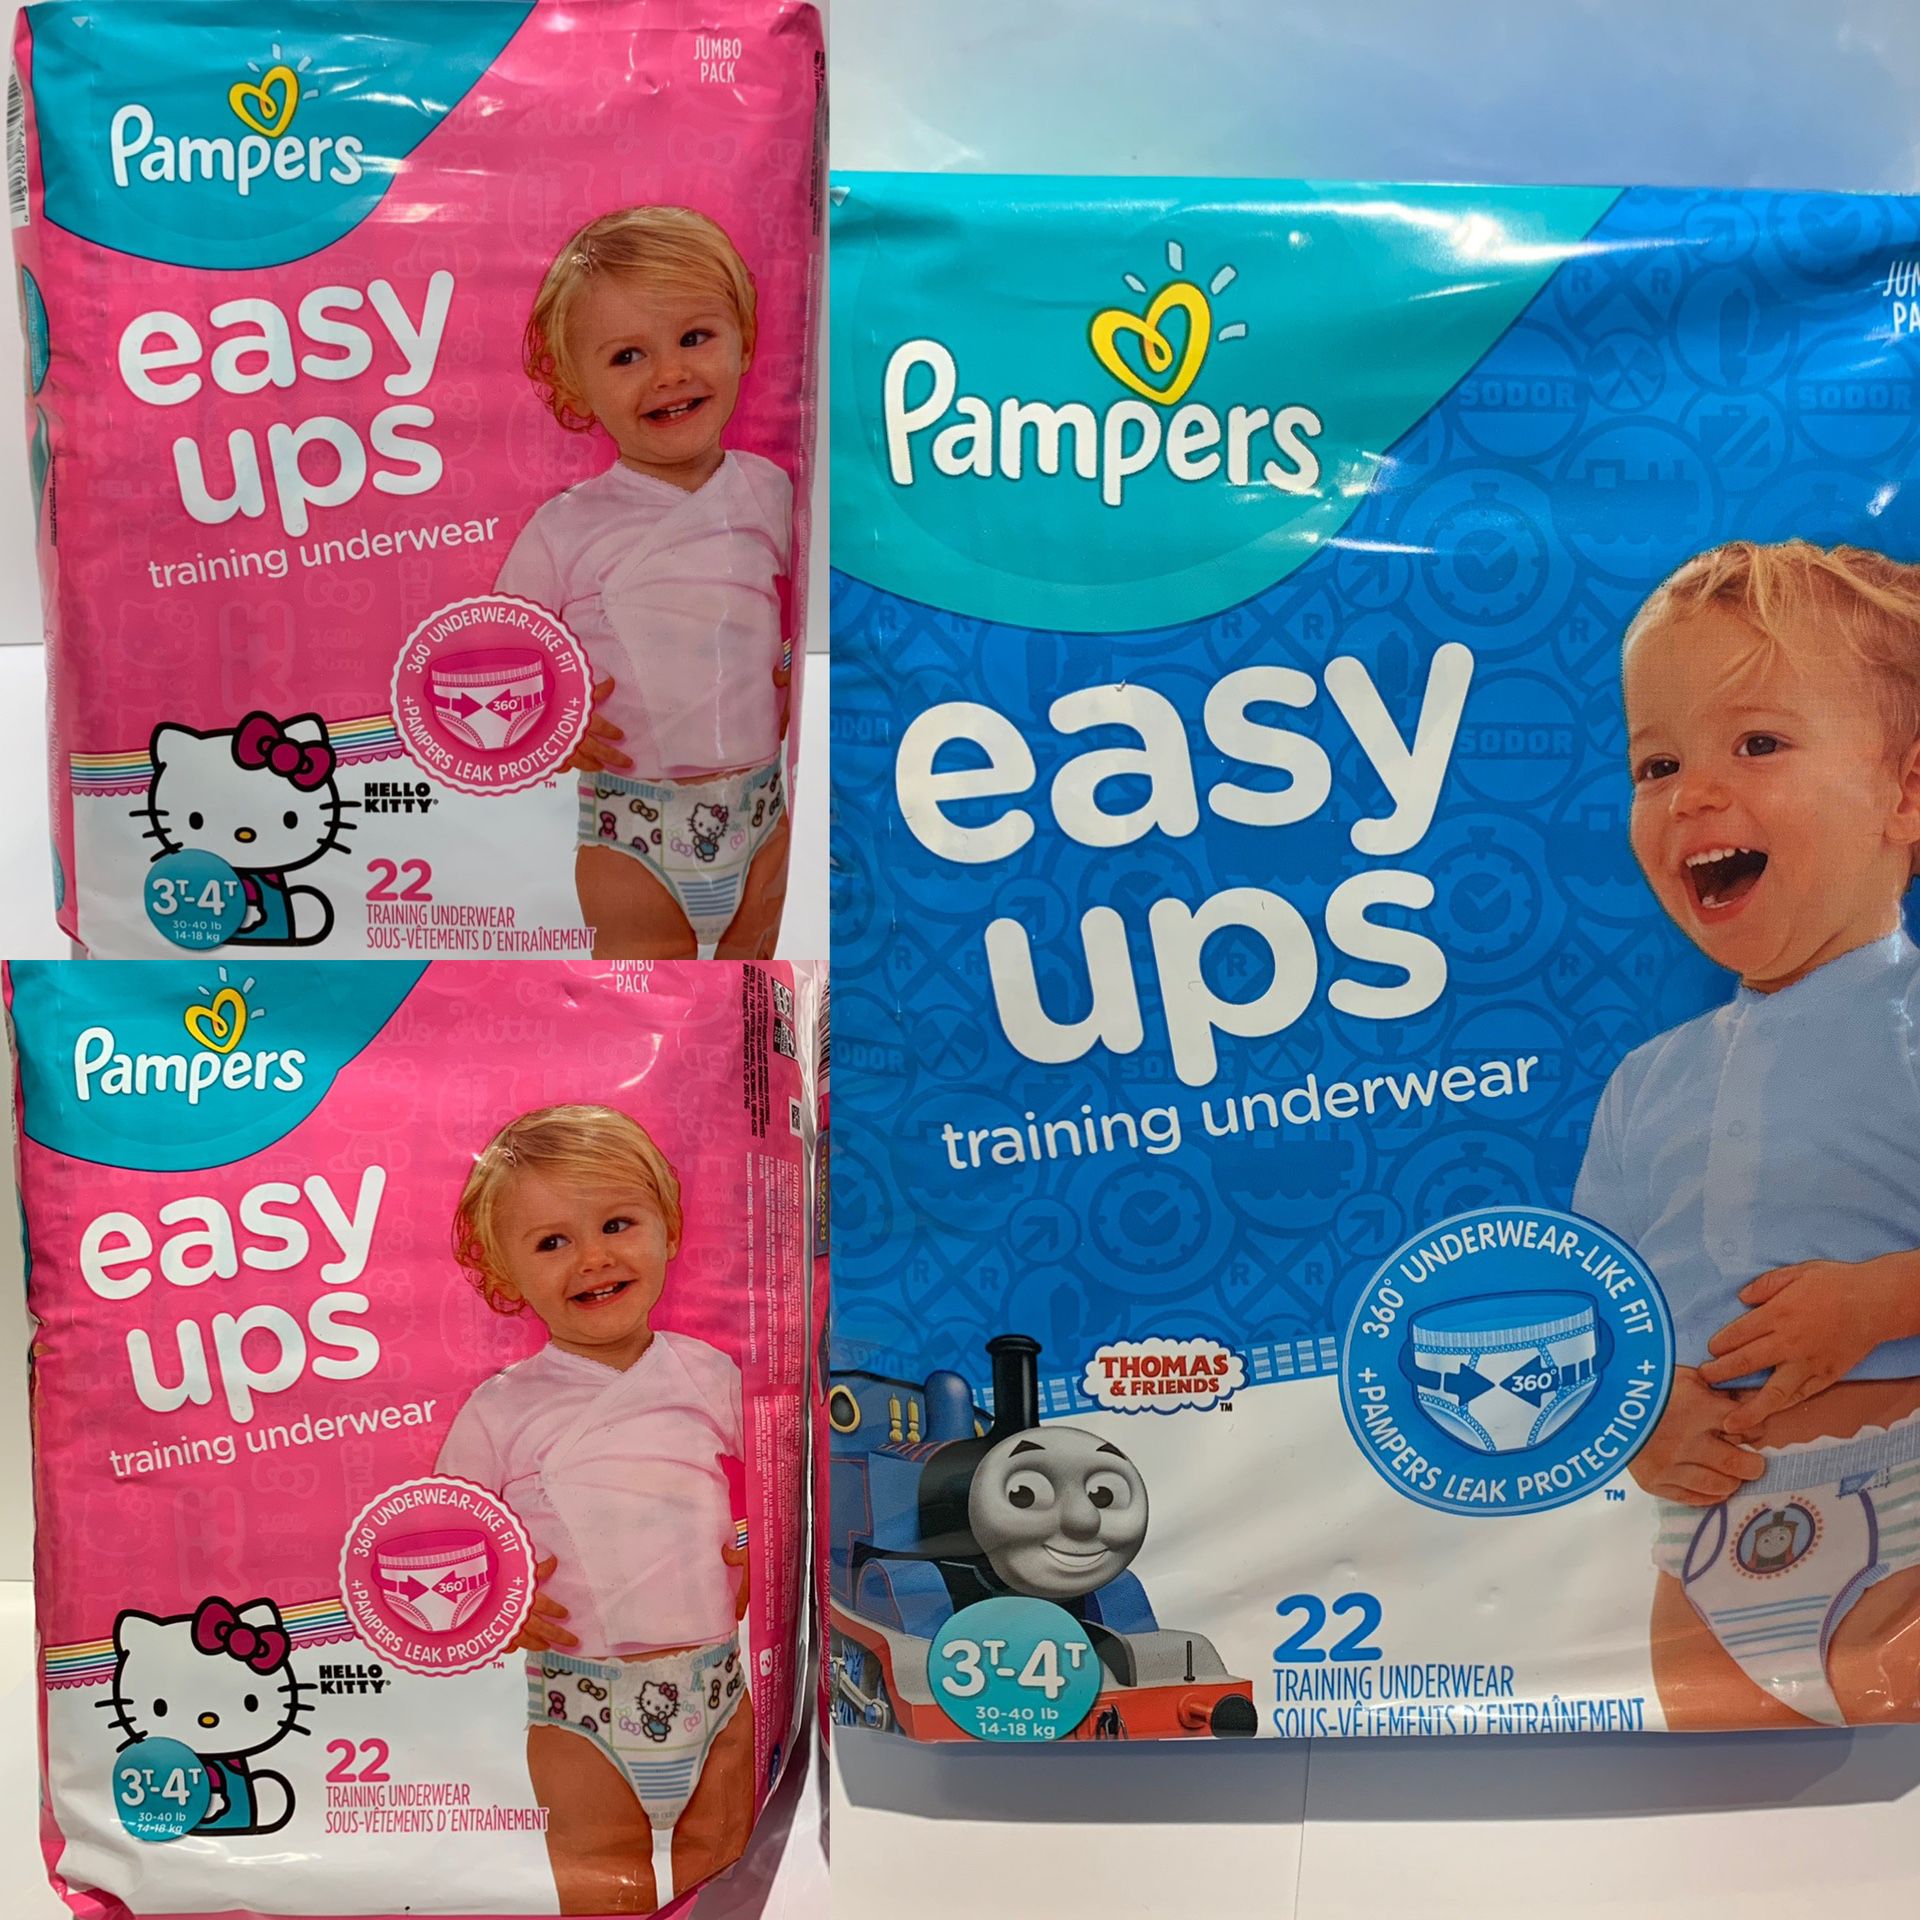 *NEW* Pampers 2 GIRL & 1 BOY Easy Ups Training Underwear, 22 count